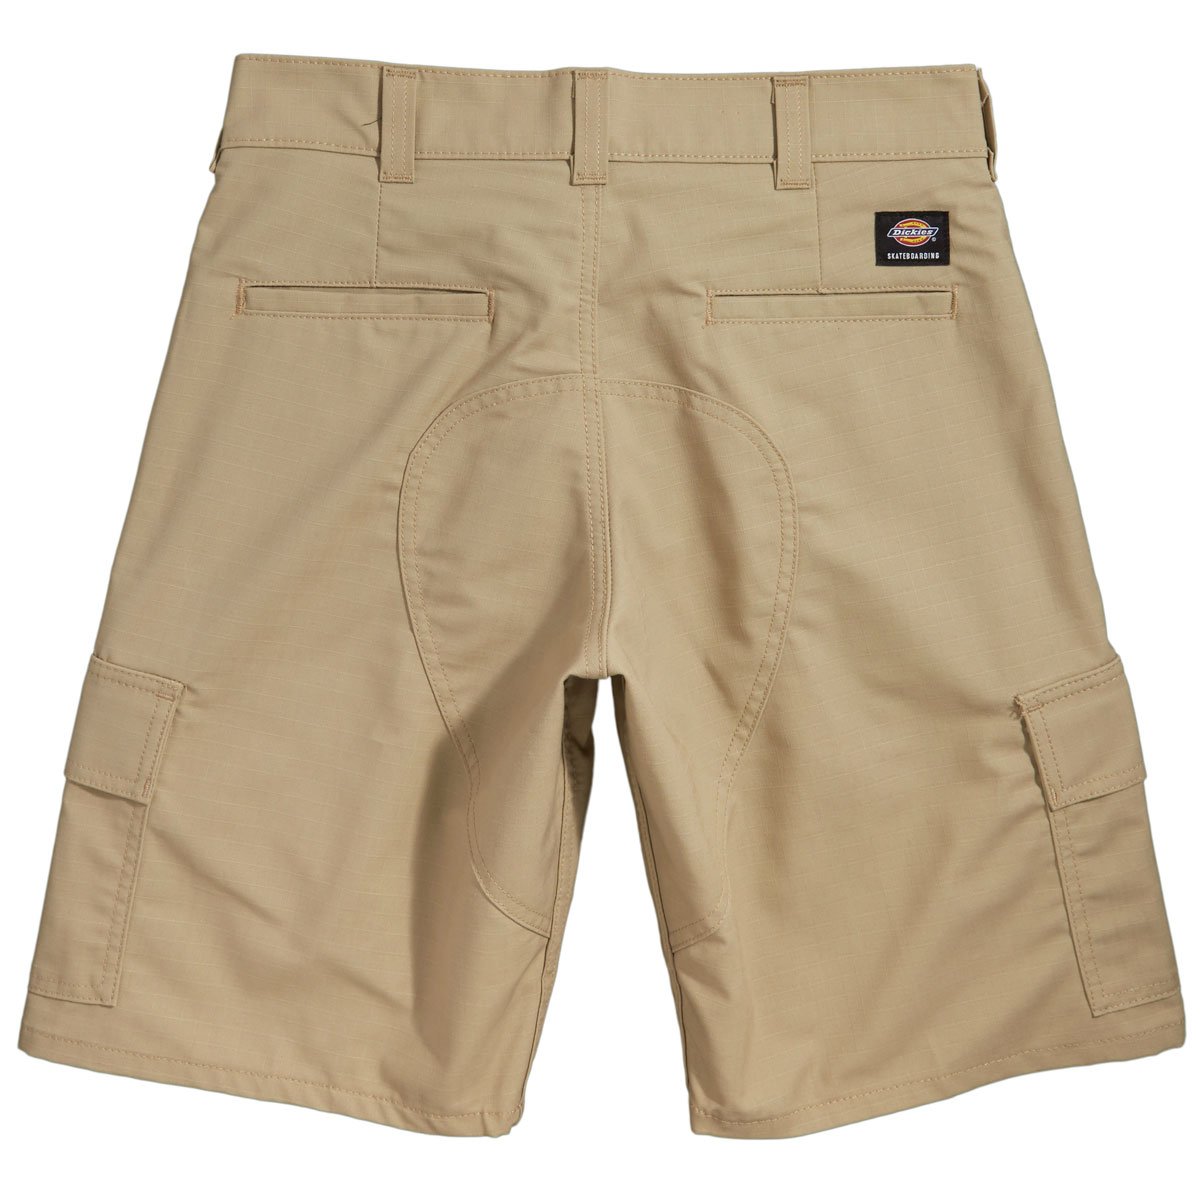 Dickies 67 Collection Cargo Shorts - Desert Sand image 2